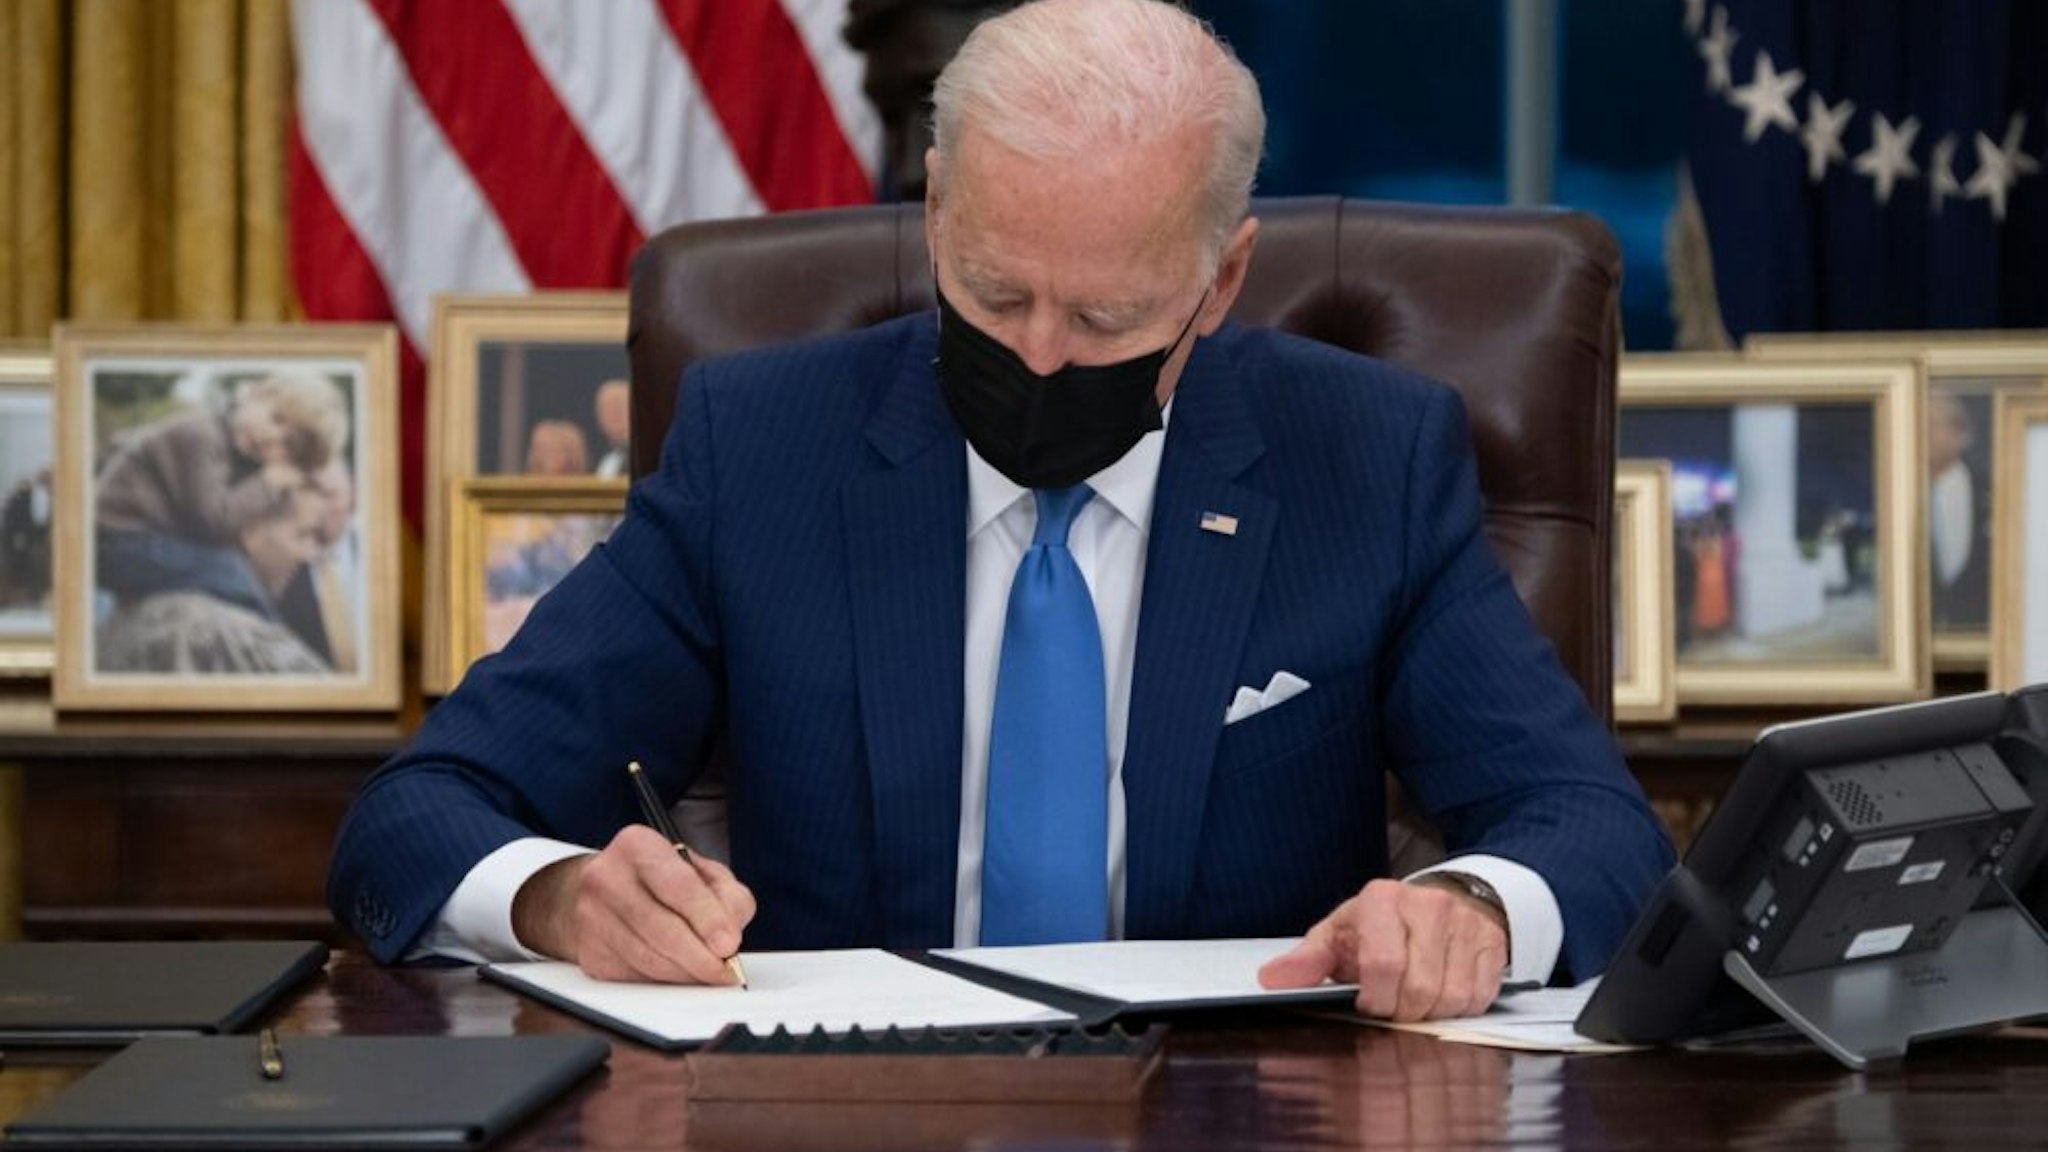 US President Joe Biden signs executive orders related to immigration in the Oval Office of the White House in Washington, DC, February 2, 2021.